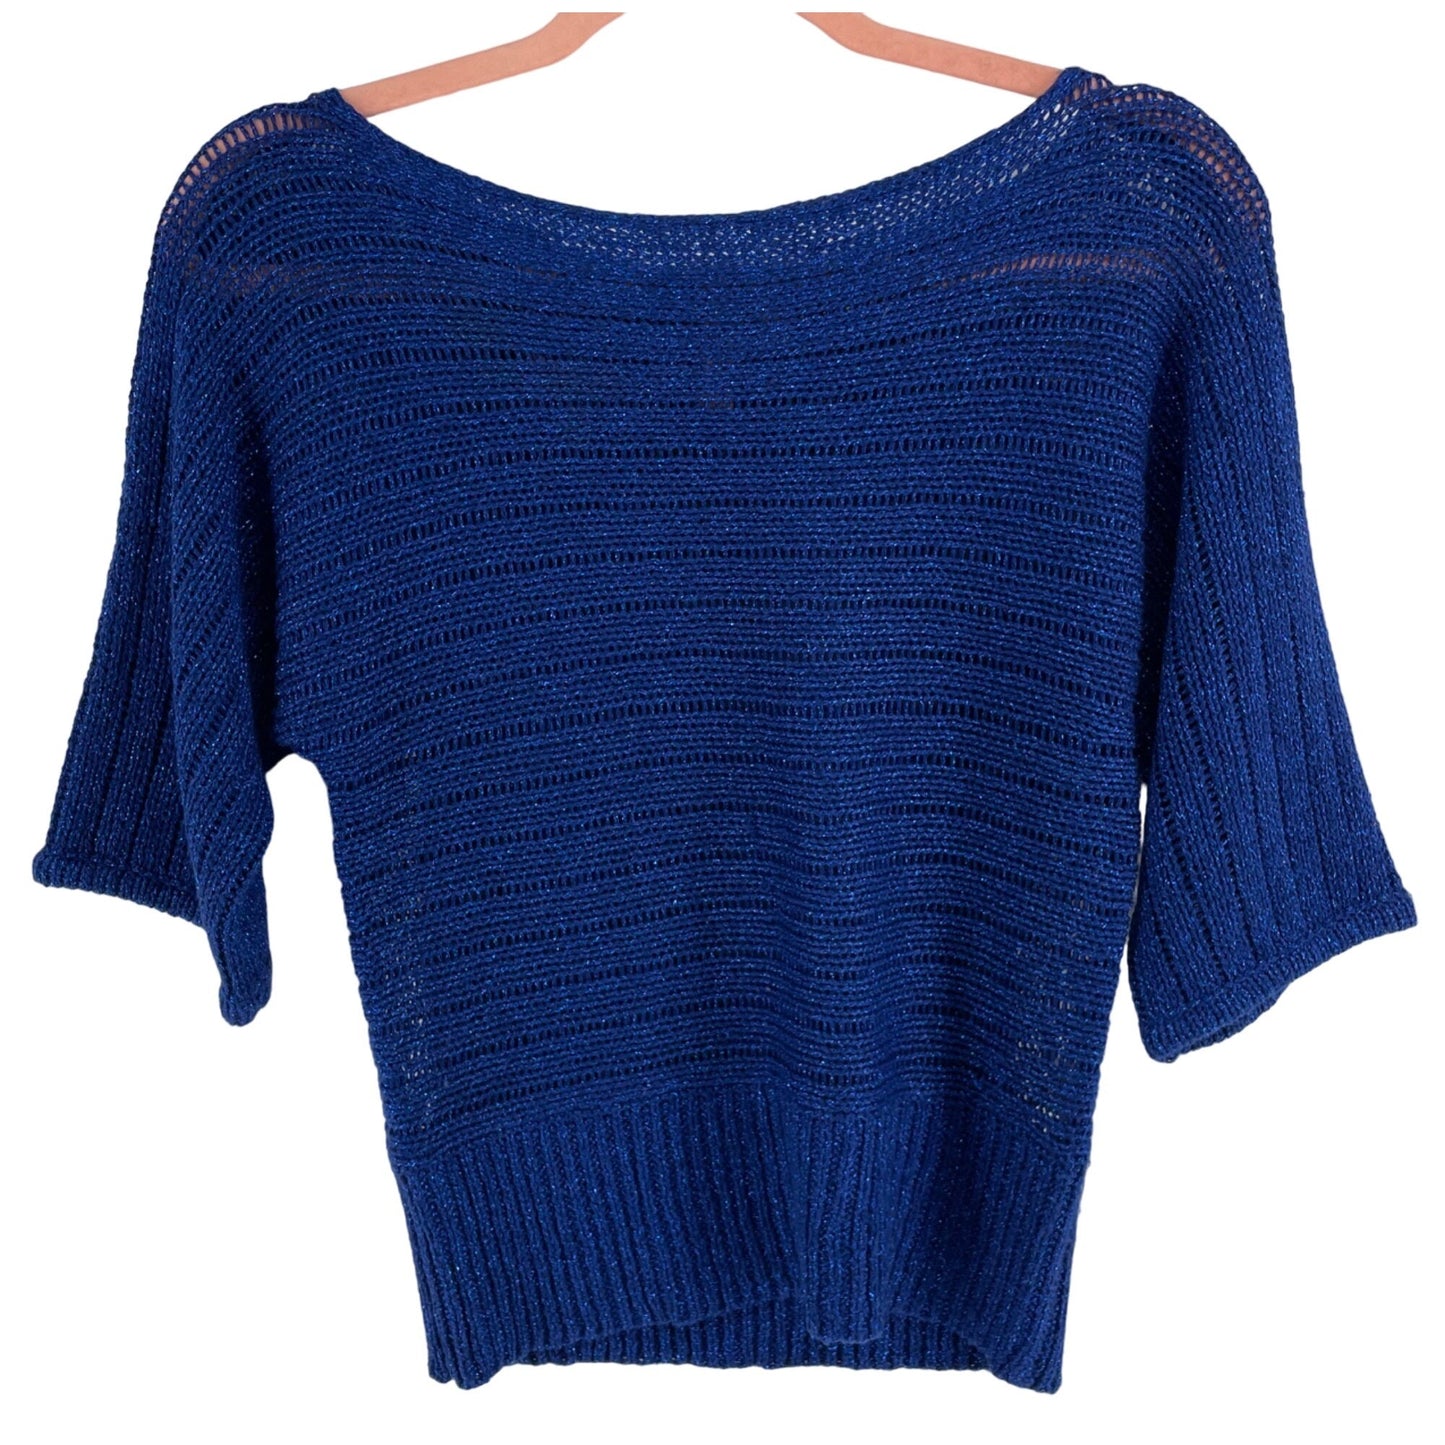 Dolled Up Women's Size Medium Sparkly Sapphire Blue 3/4 Length Sleeve Knit Sweater